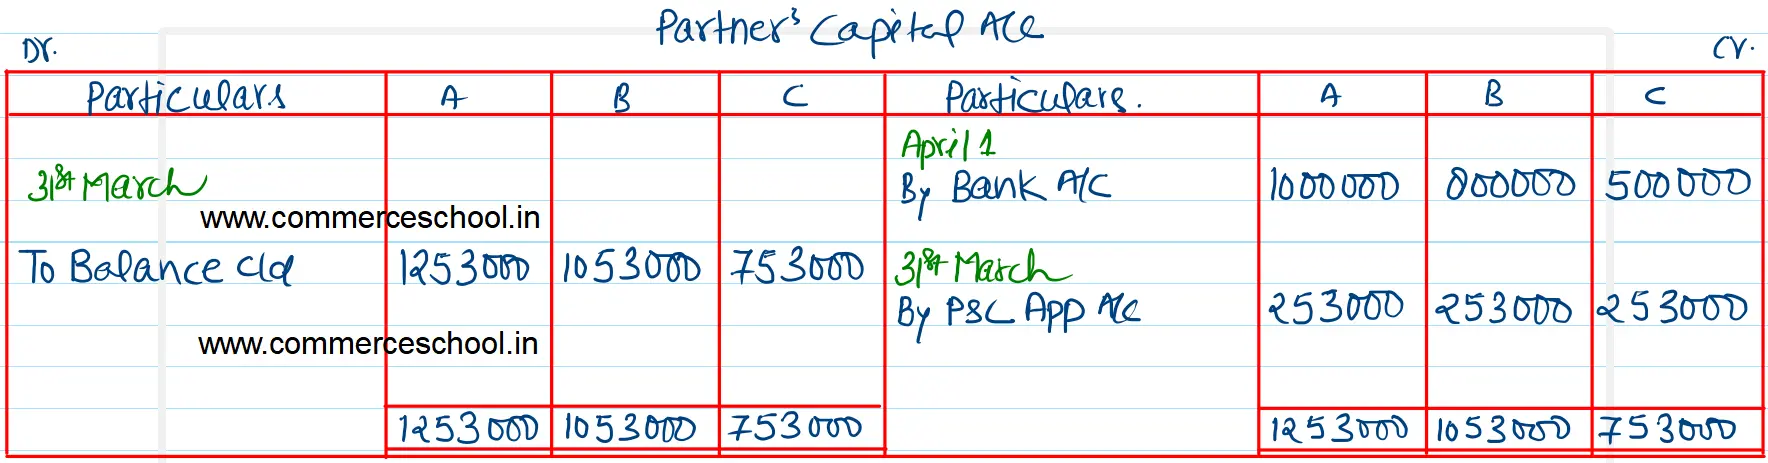 A, B and C entered into partnership on 1st April 2022 with capitals of ₹ 10,00,000, ₹ 8,00,000 and ₹ 5,00,000 respectively. On 1st July 2022, B advanced ₹ 2,00,000 and on 1st December 2022 C advanced ₹ 1,00,000 by way of loans to the firm